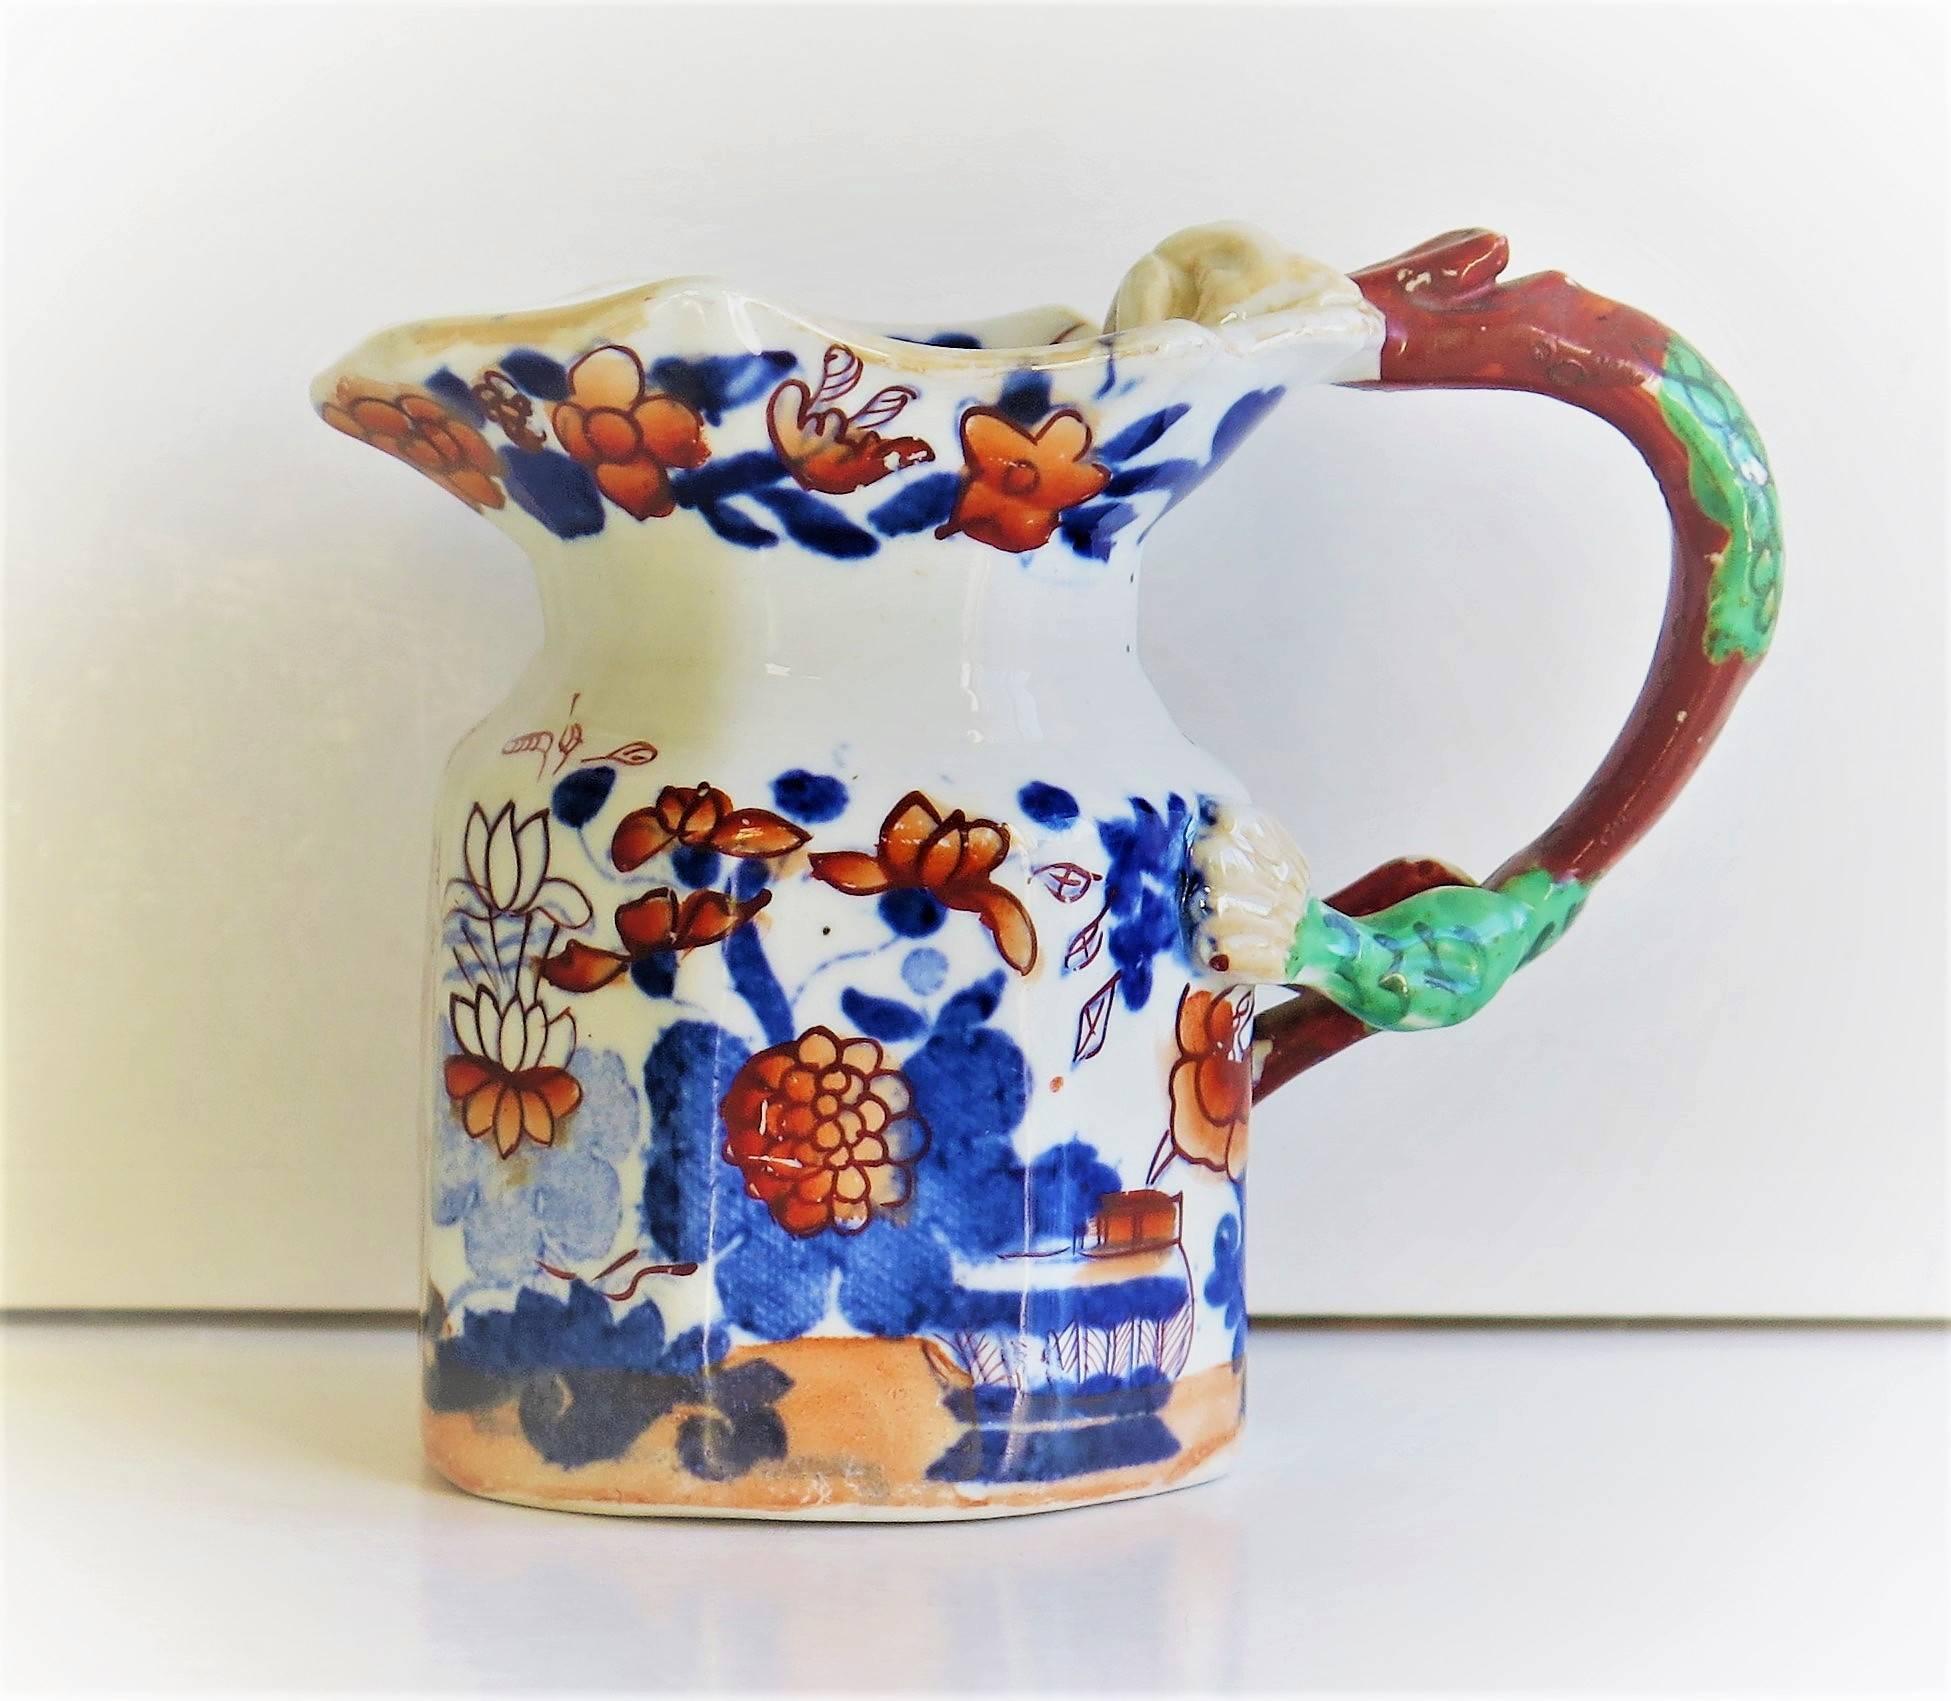 This is a very good, early Mason's Ironstone cream jug or pitcher, made at their Lane Delph factory, Staffordshire Potteries, England, in the early 19th century.

This jug has the 